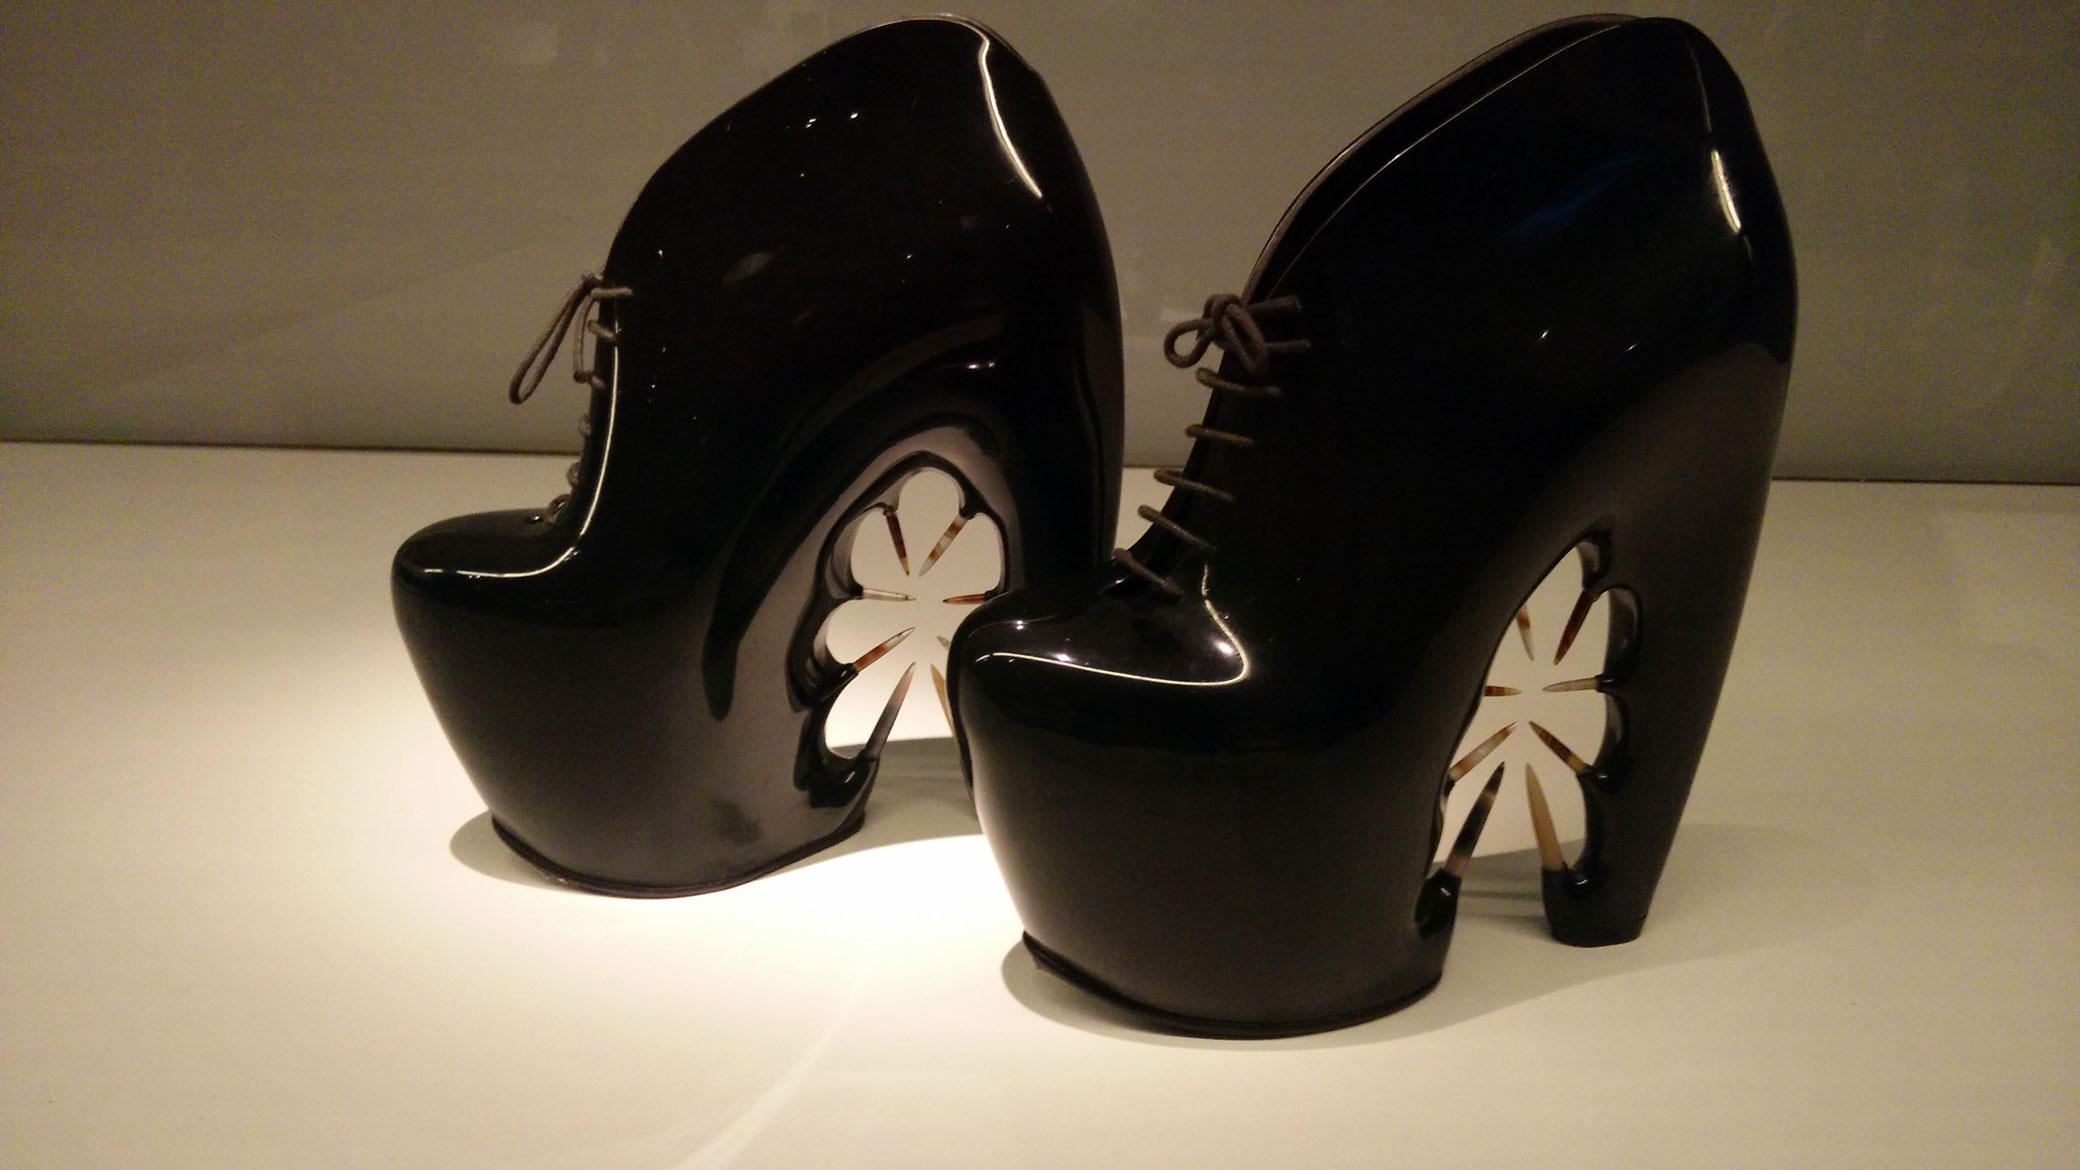 The Fanged Shoes